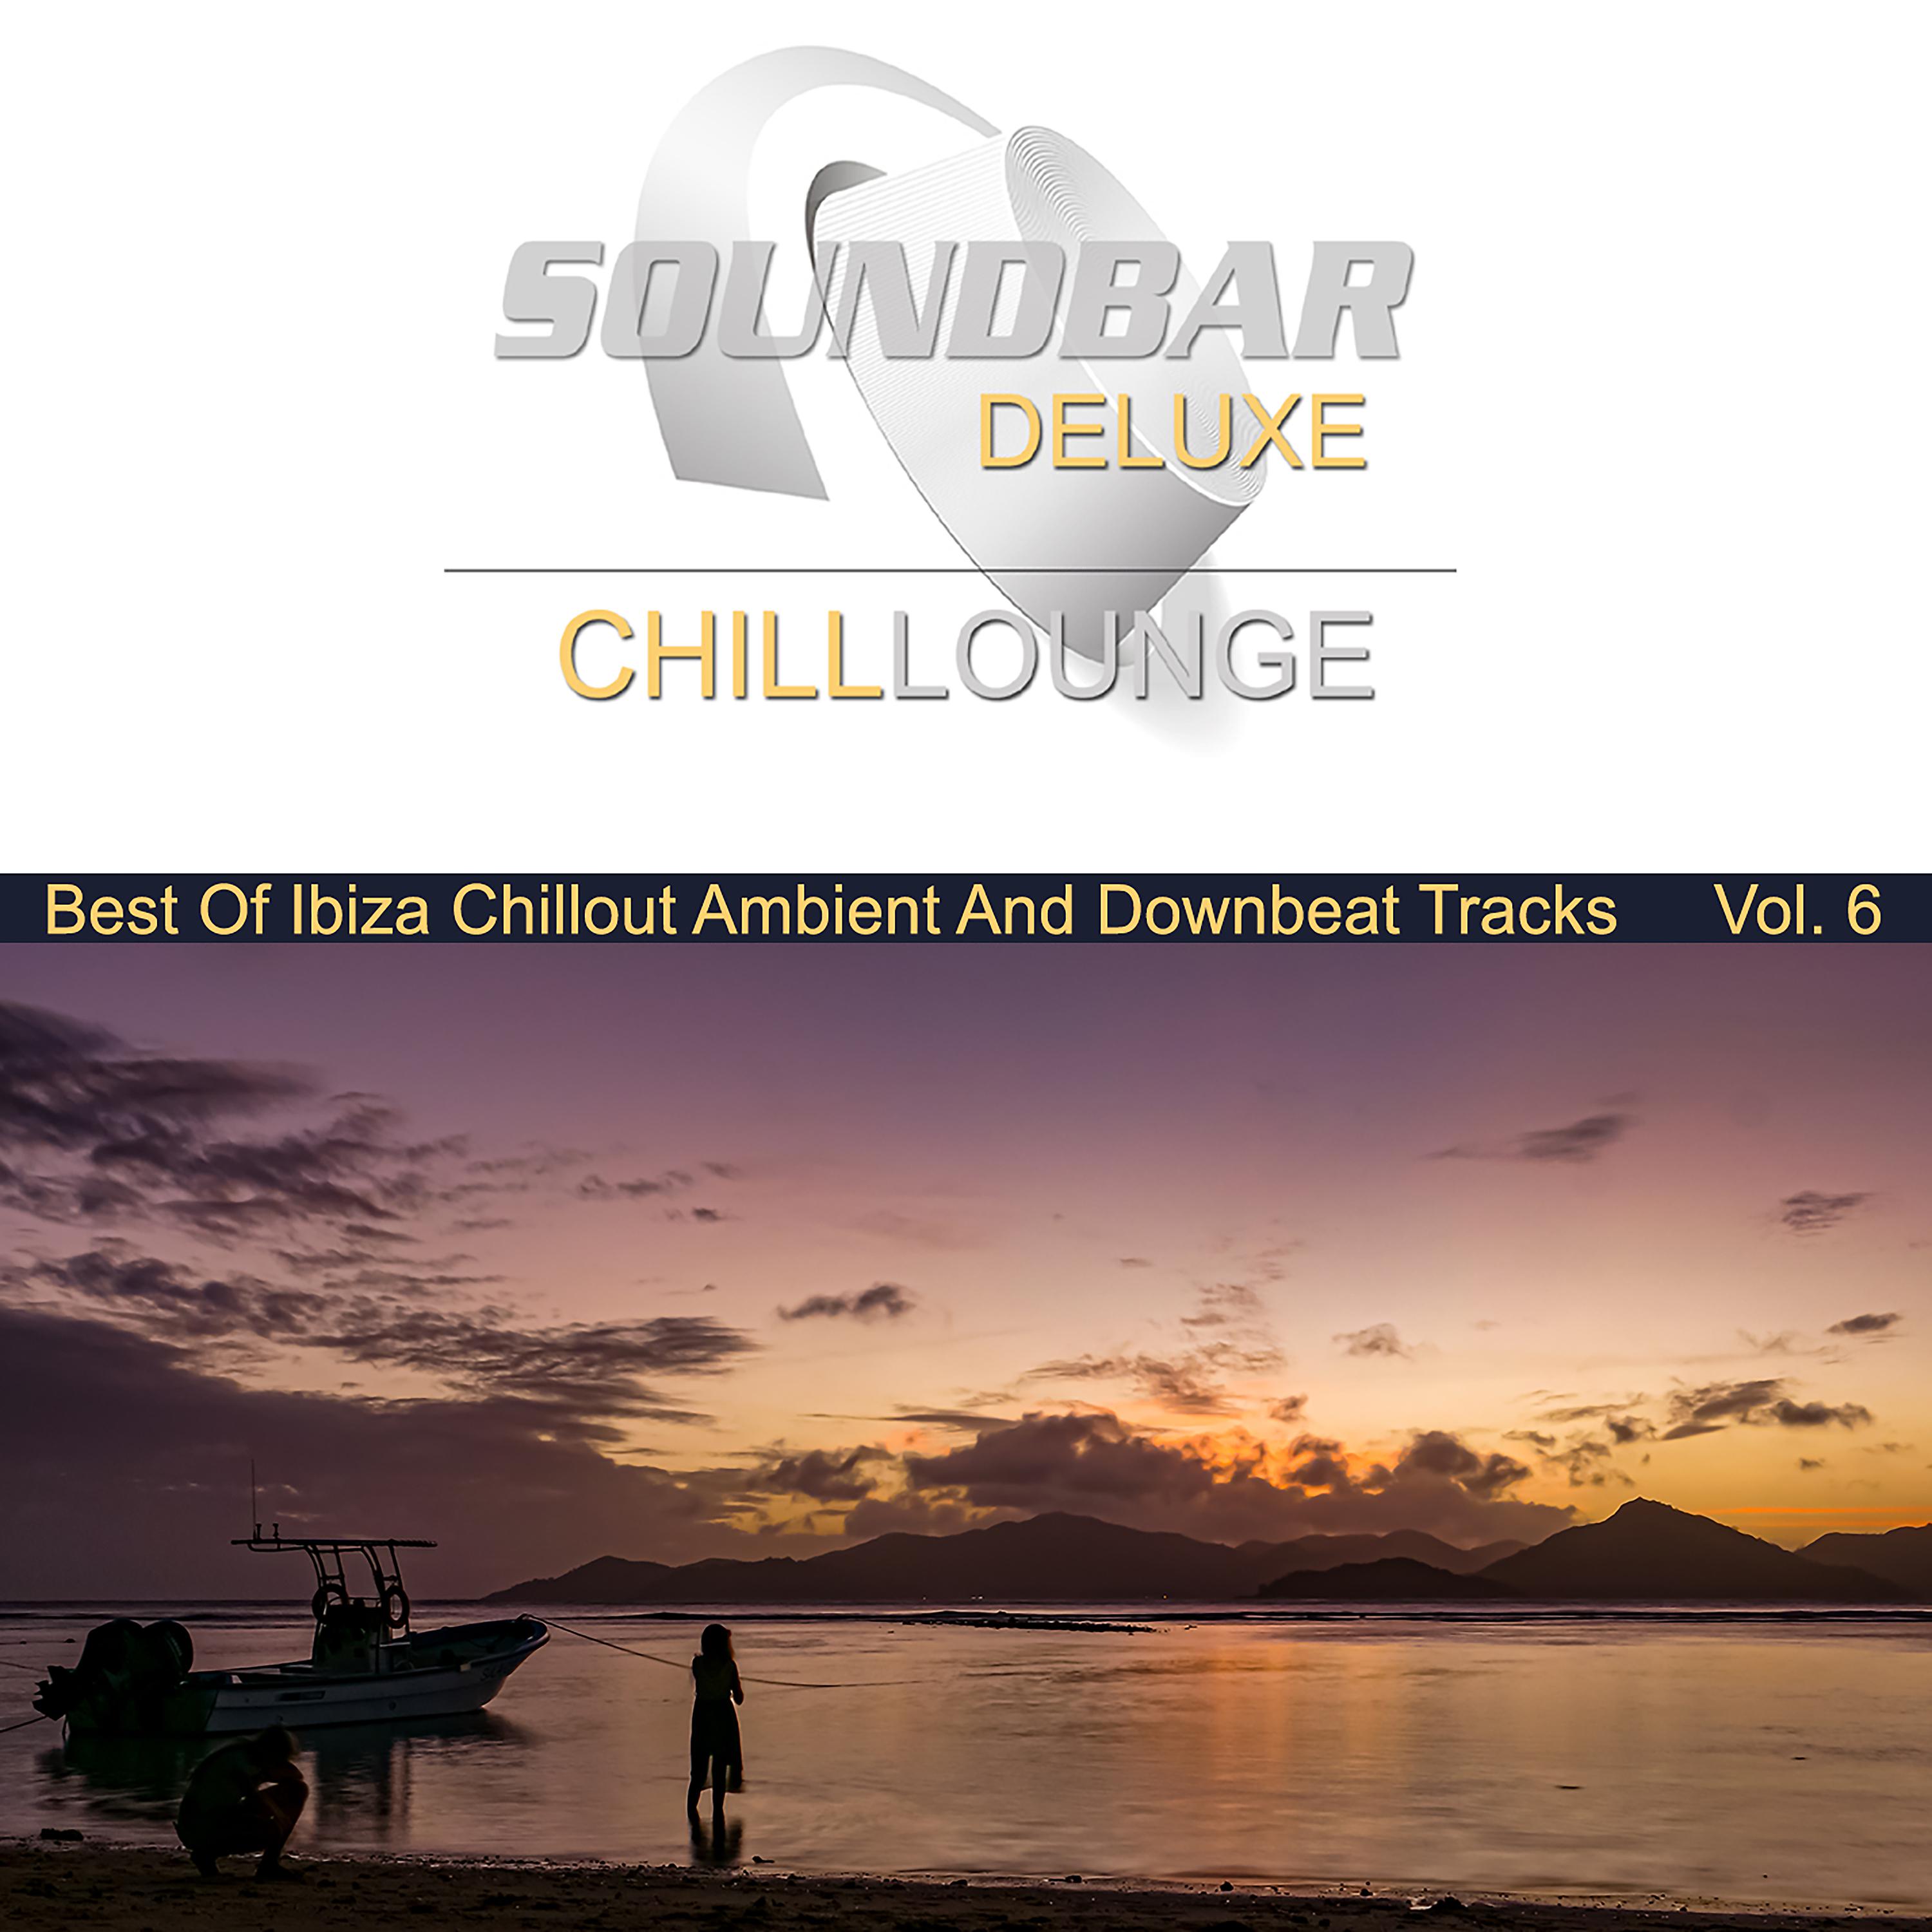 Постер альбома Soundbar Deluxe Chill Lounge, Vol. 6 (Best of Ibiza Chillout Ambient and Downbeat Tracks)